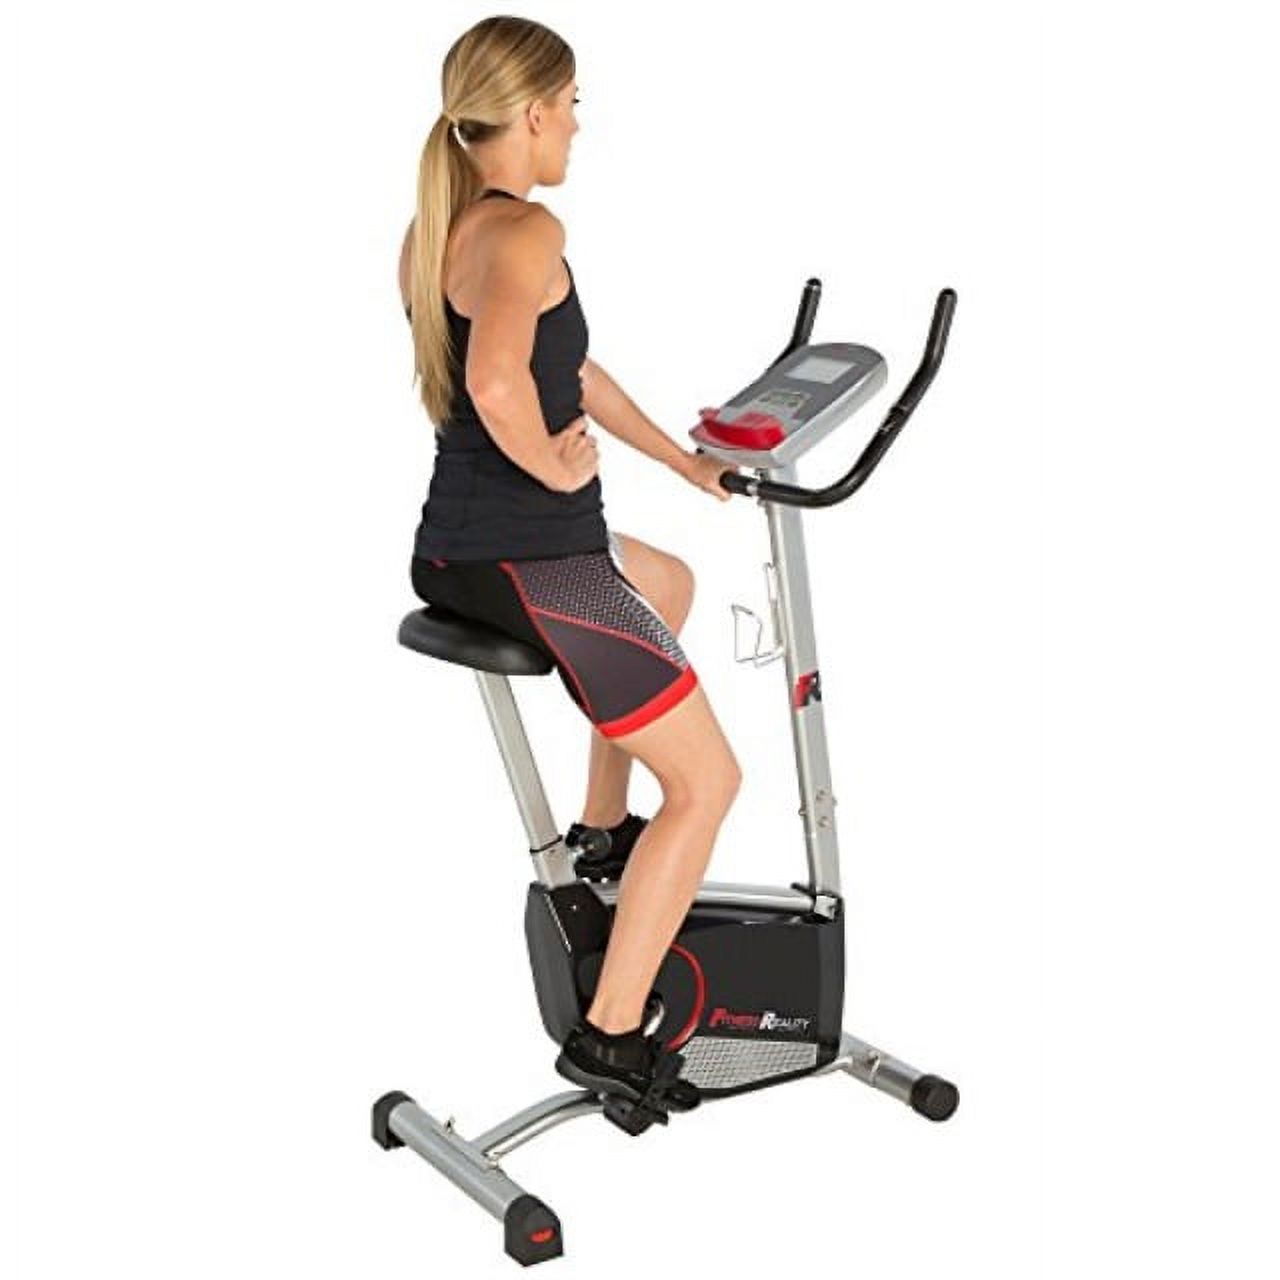 FITNESS REALITY 210 Upright Exercise Bike with 21 Computer Workout Programs - image 1 of 7